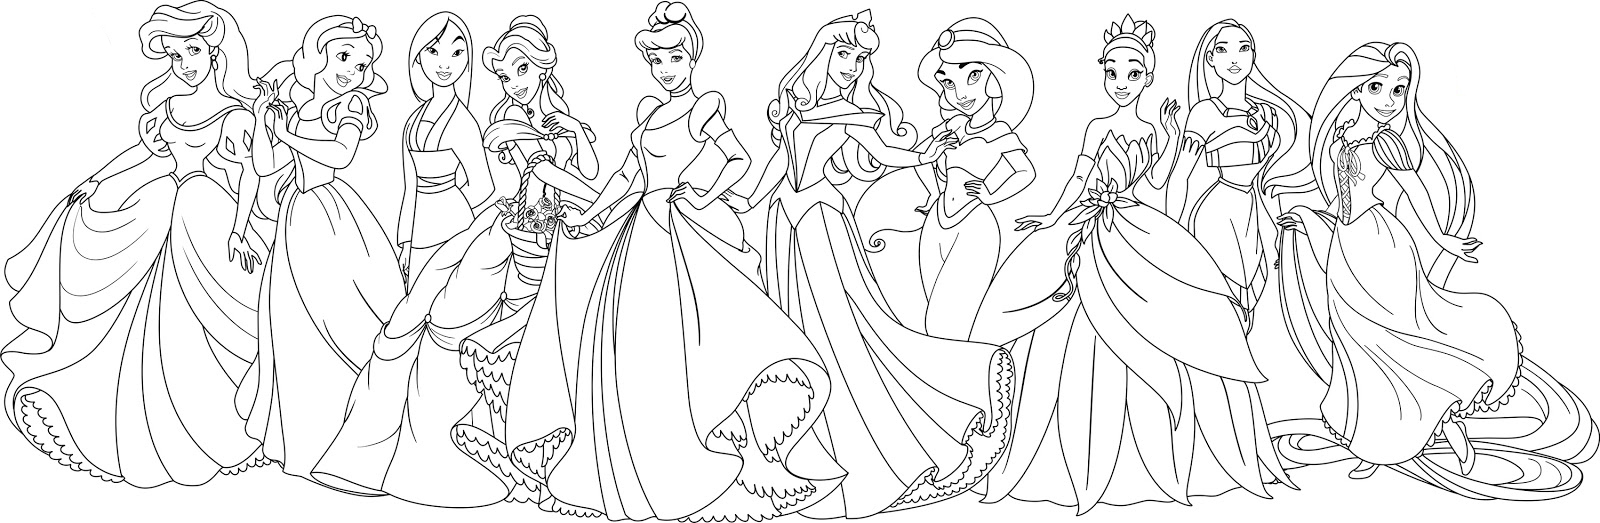 Disney Princesss for Adults Coloring Pages   Coloring Cool